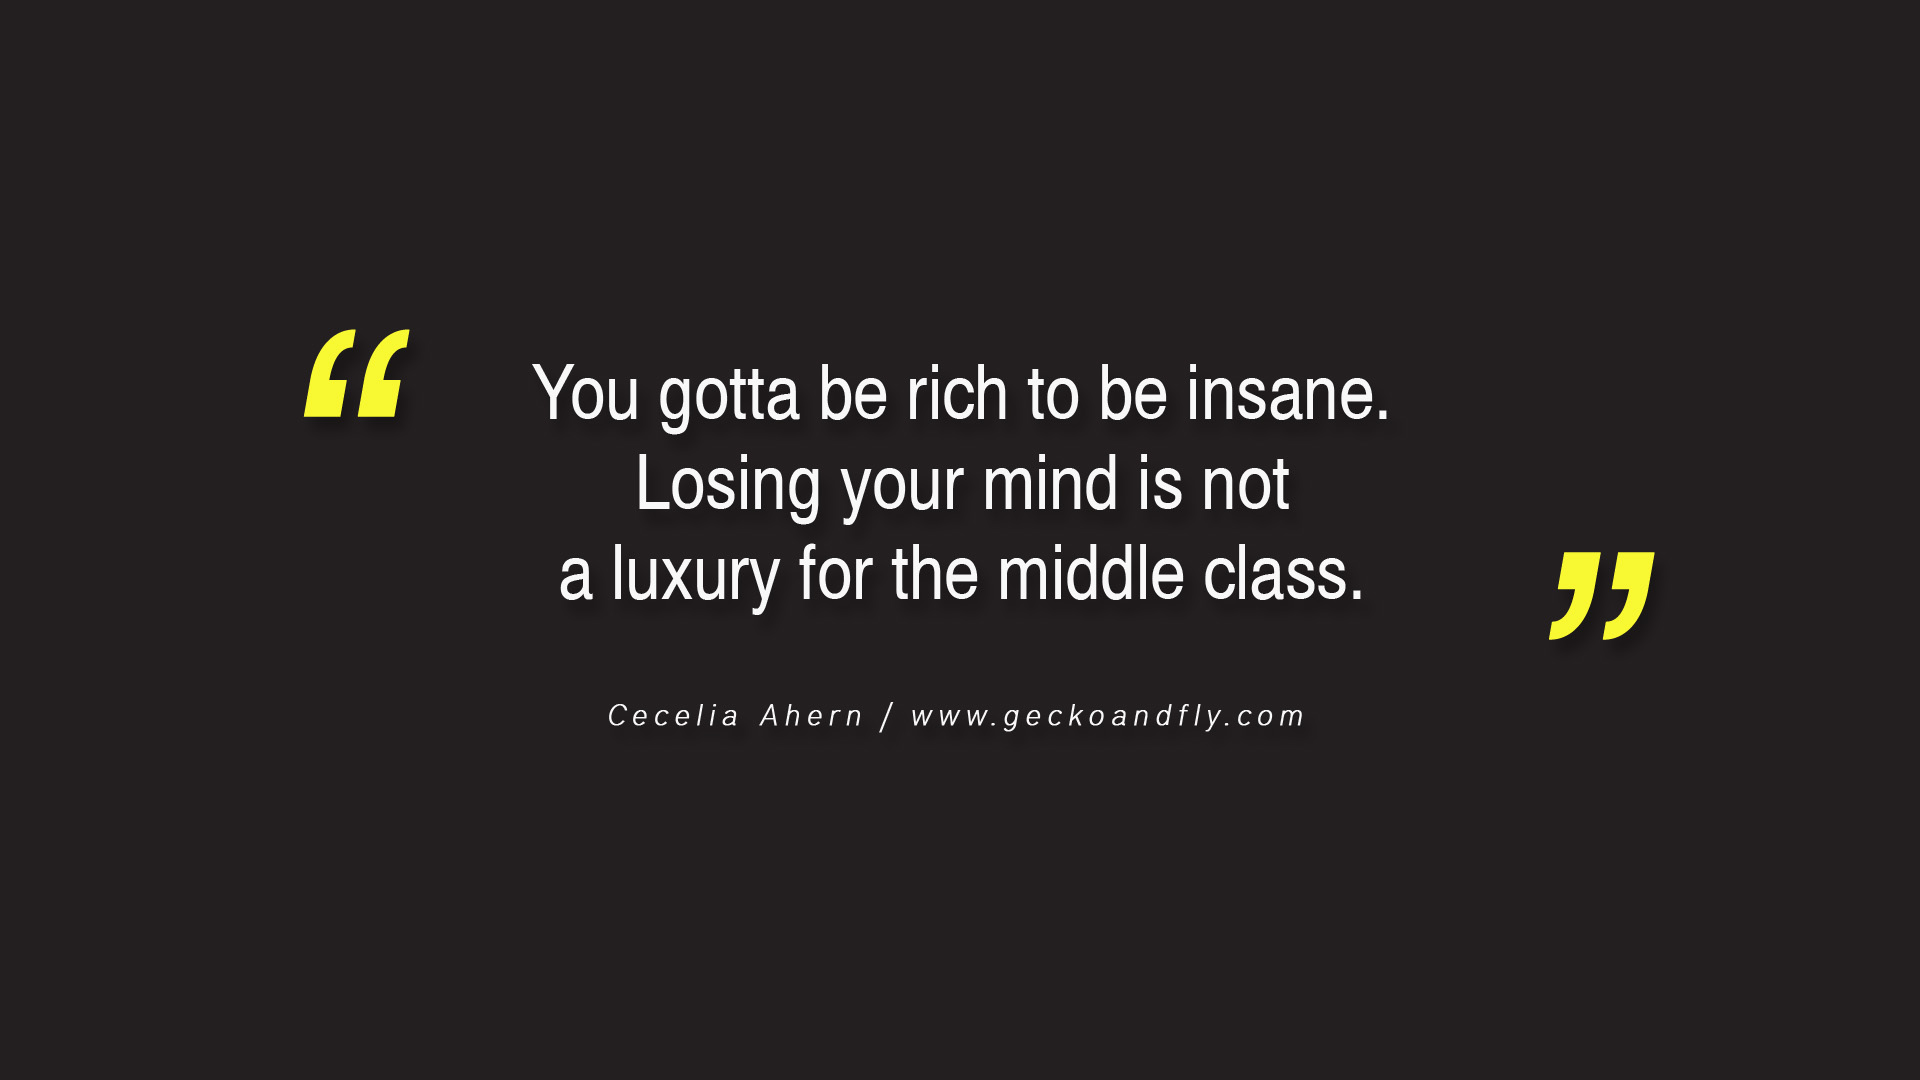 You gotta be rich to be insane Losing your mind is not a luxury for